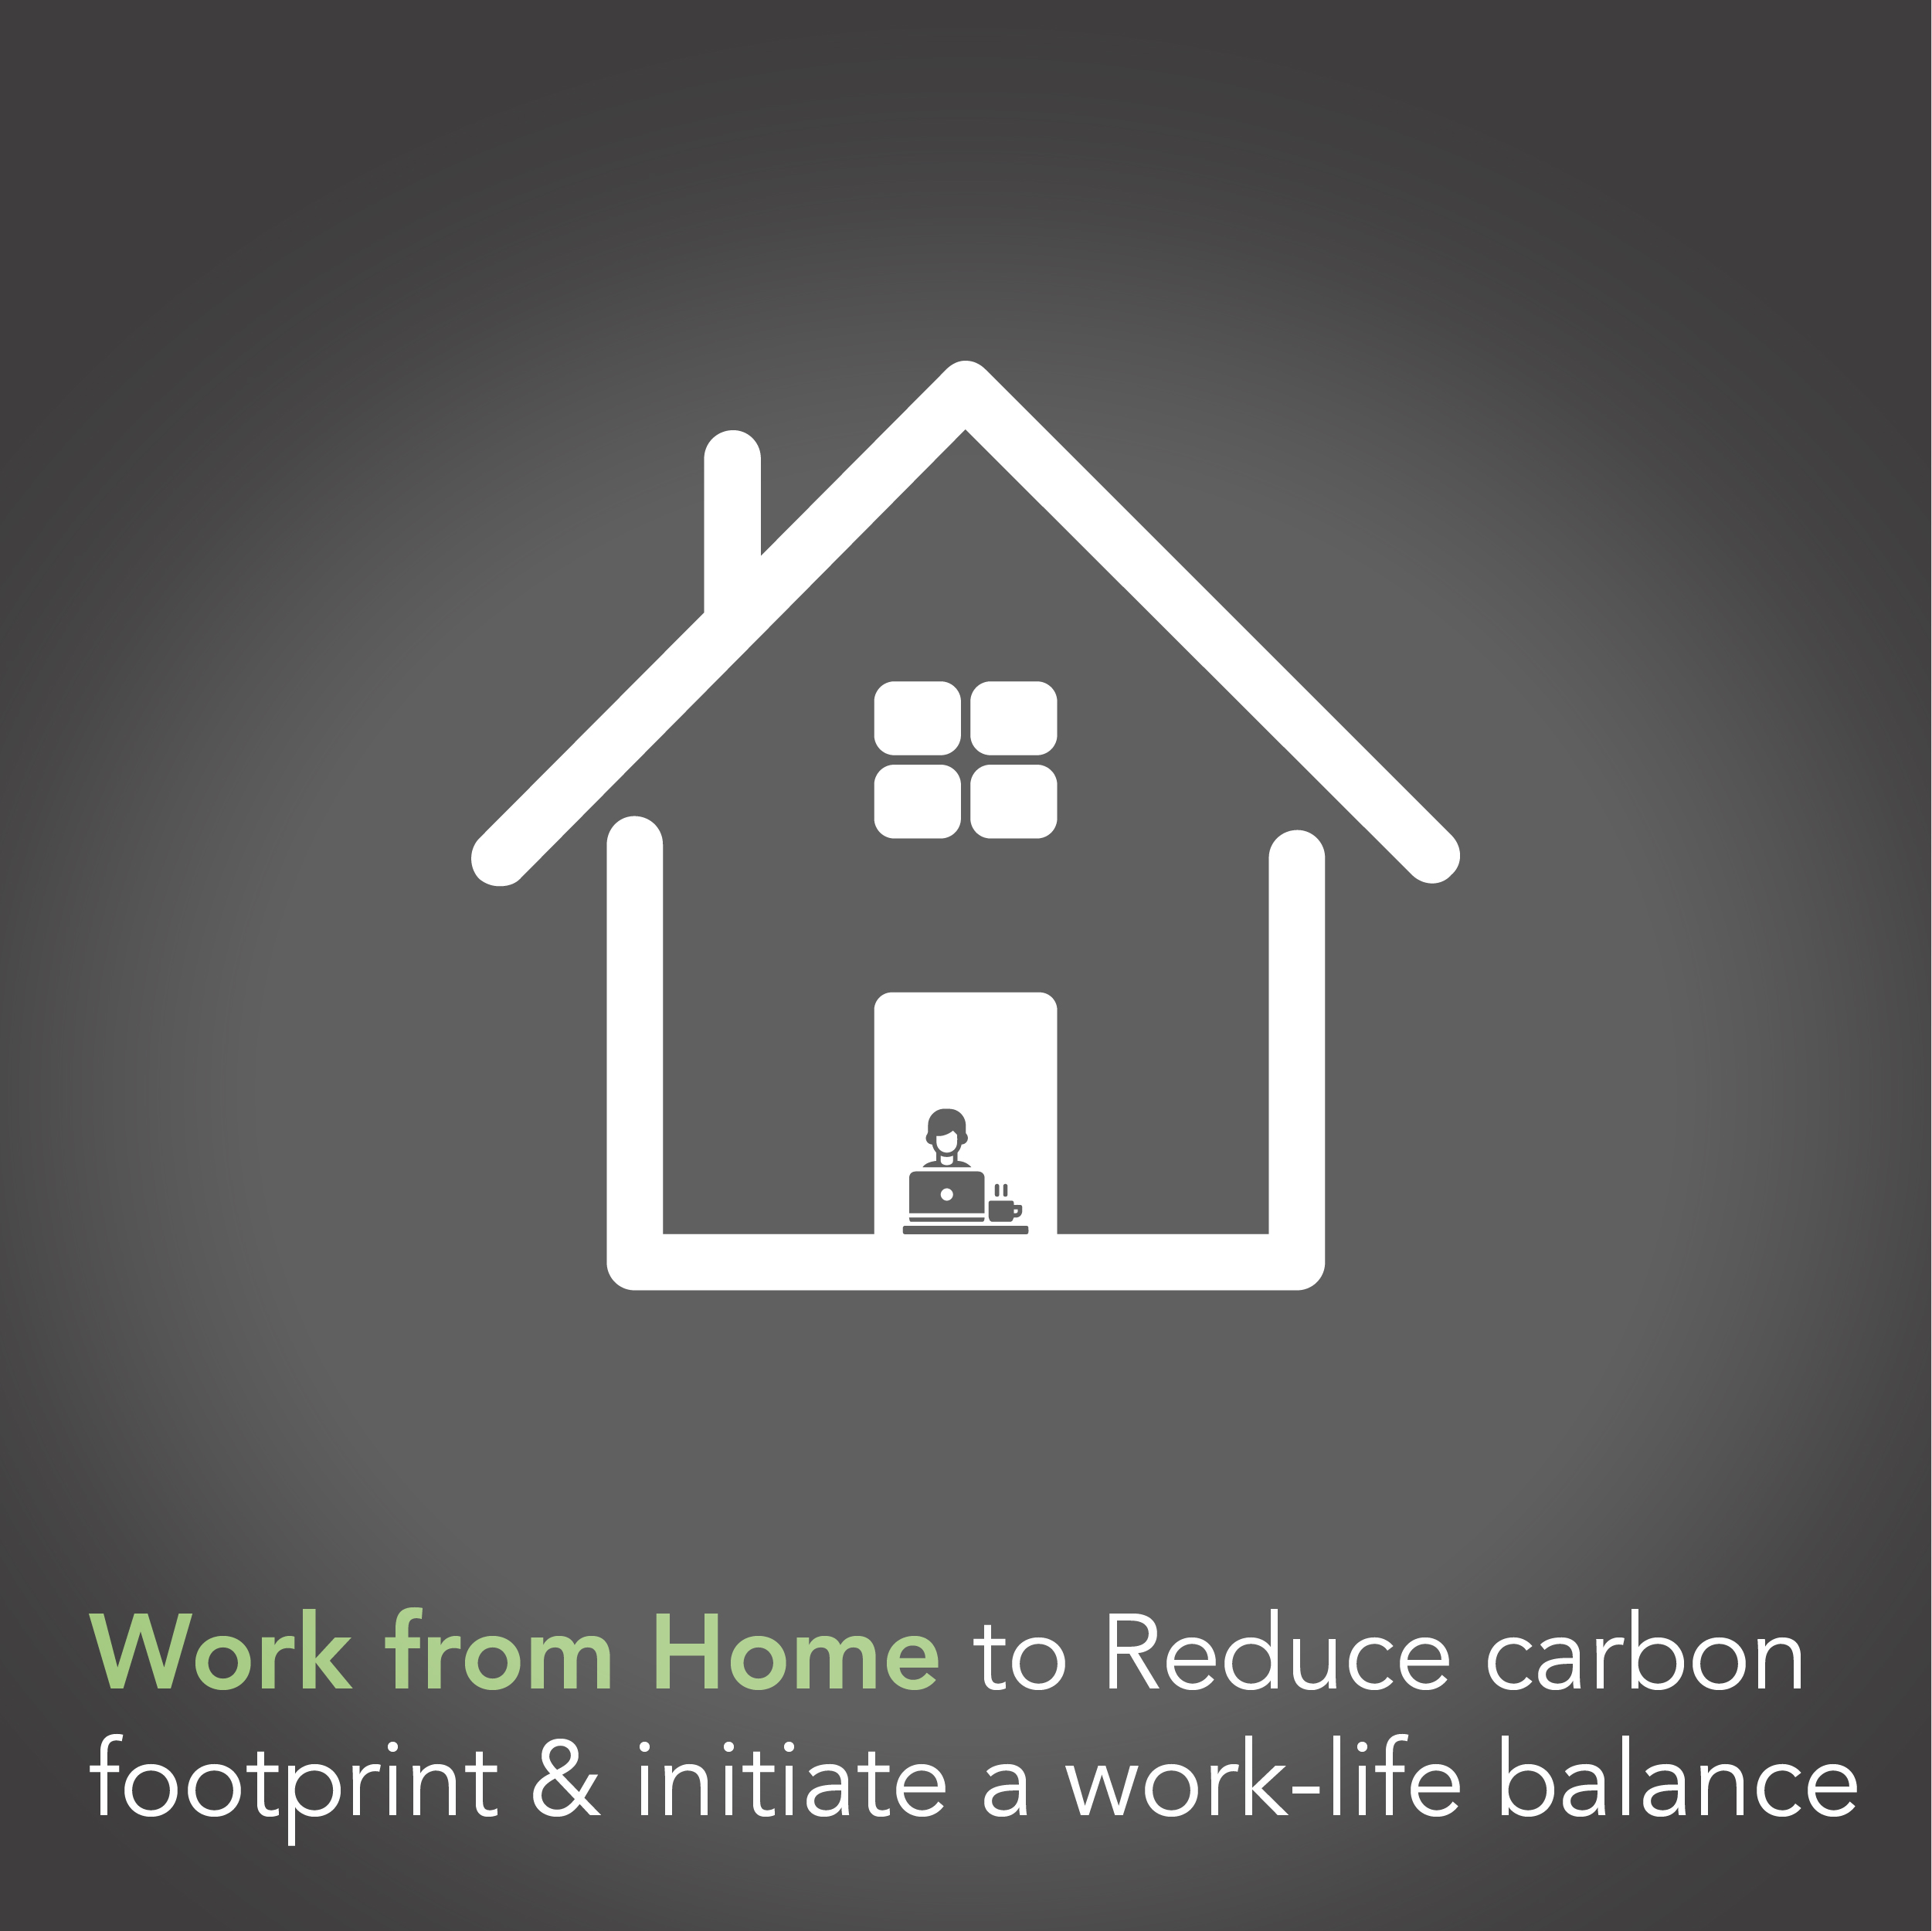 Work from Home to Reduce carbon footprint & initiate a work-life balance